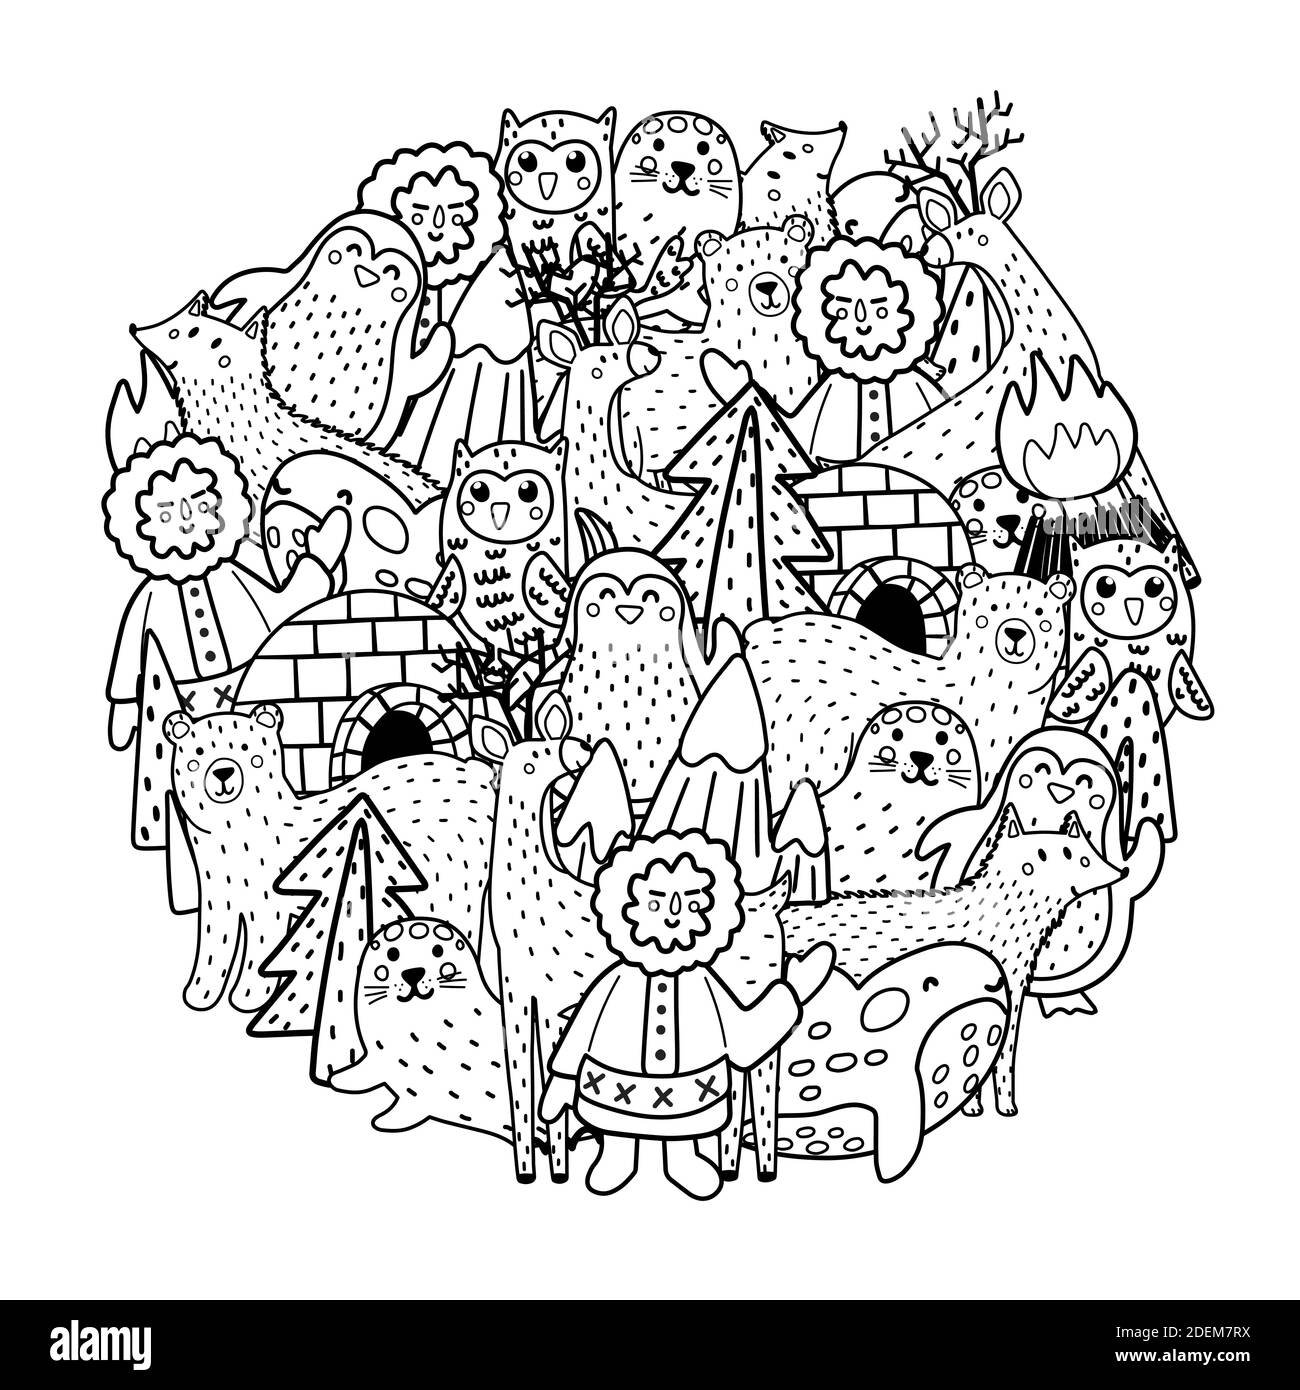 multiple circle coloring pages